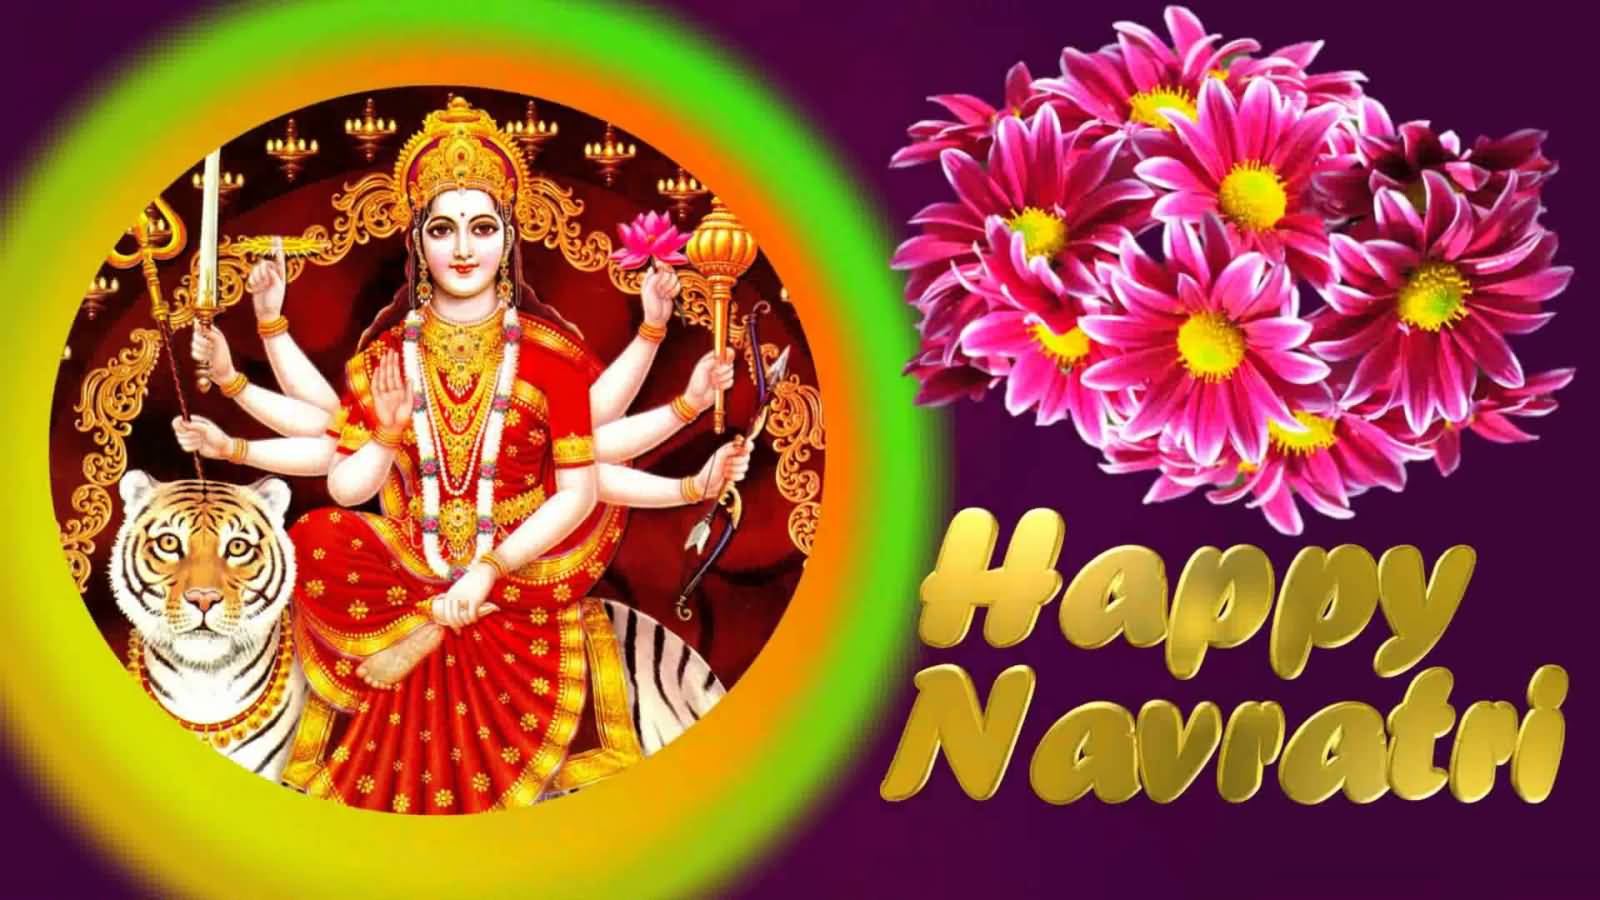 Happy Navratri Greeting Card Picture